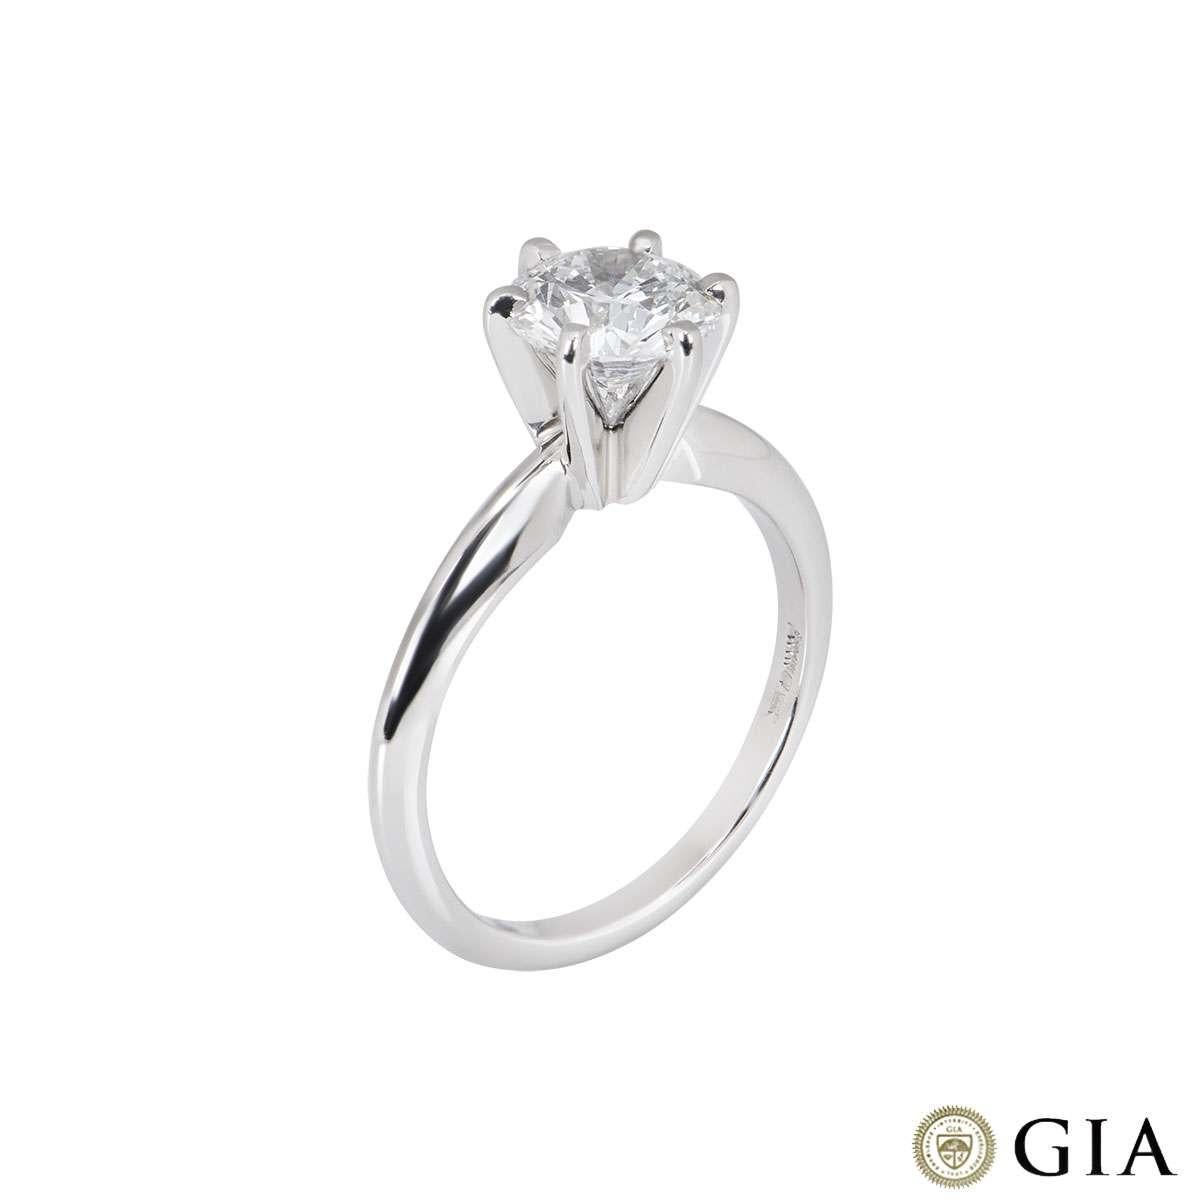 A stunning round brilliant cut diamond ring in platinum. The diamond is set within a classic 6 claw setting and weighs 1.15ct, is D colour and VVS2 in clarity. The diamond scores an excellent rating in all three aspects for cut, polish and symmetry